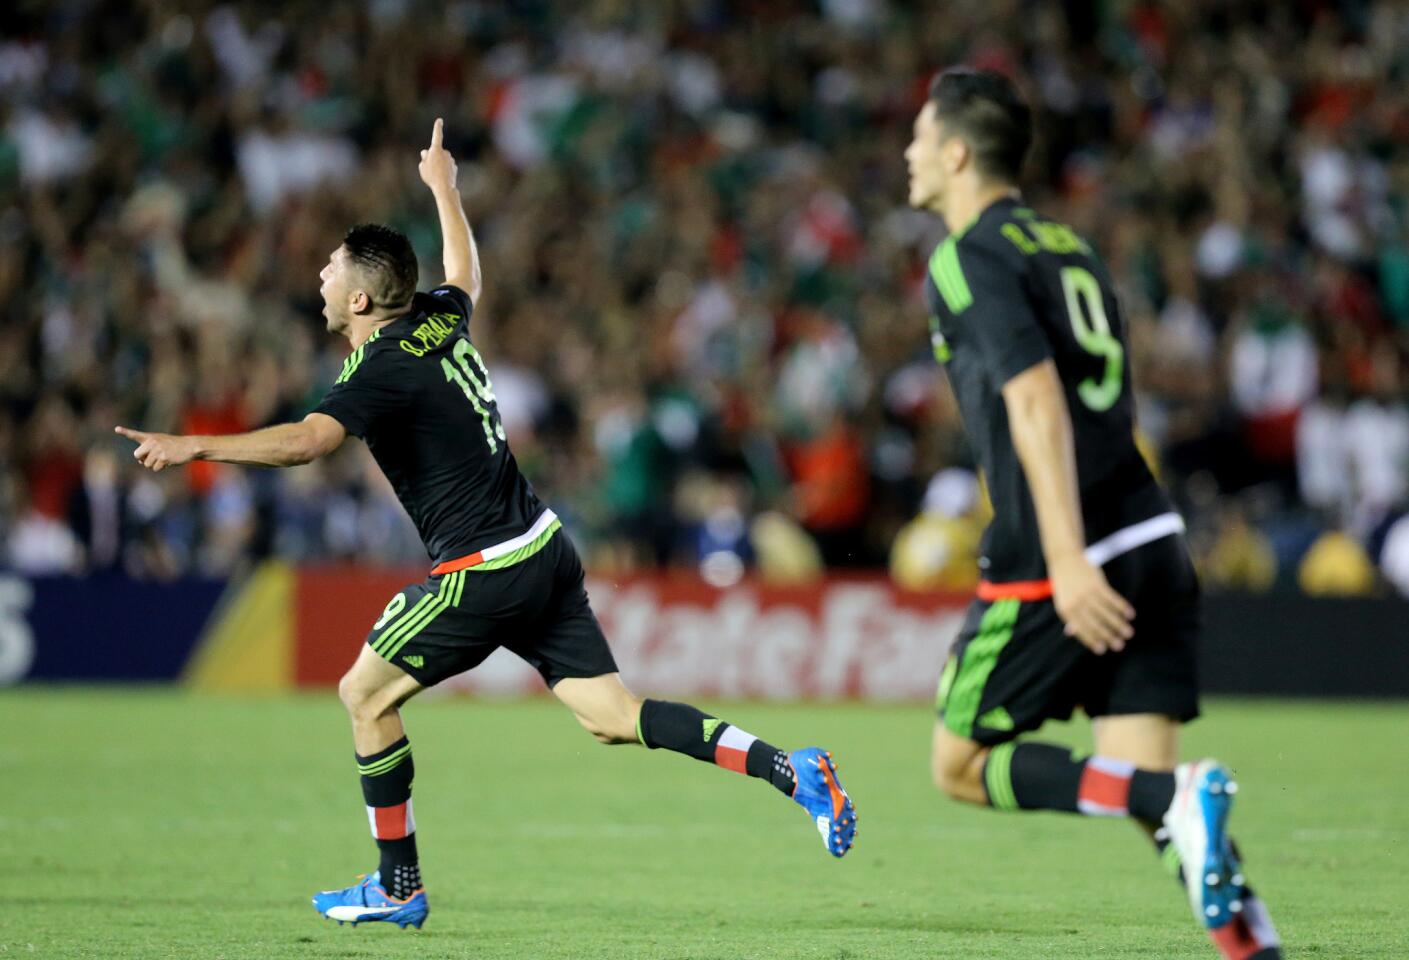 Mexico forward Oribe Peralta celebrates a goal against the U.S. in the first overtime period of a CONCACAF Cup game at the Rose Bowl.